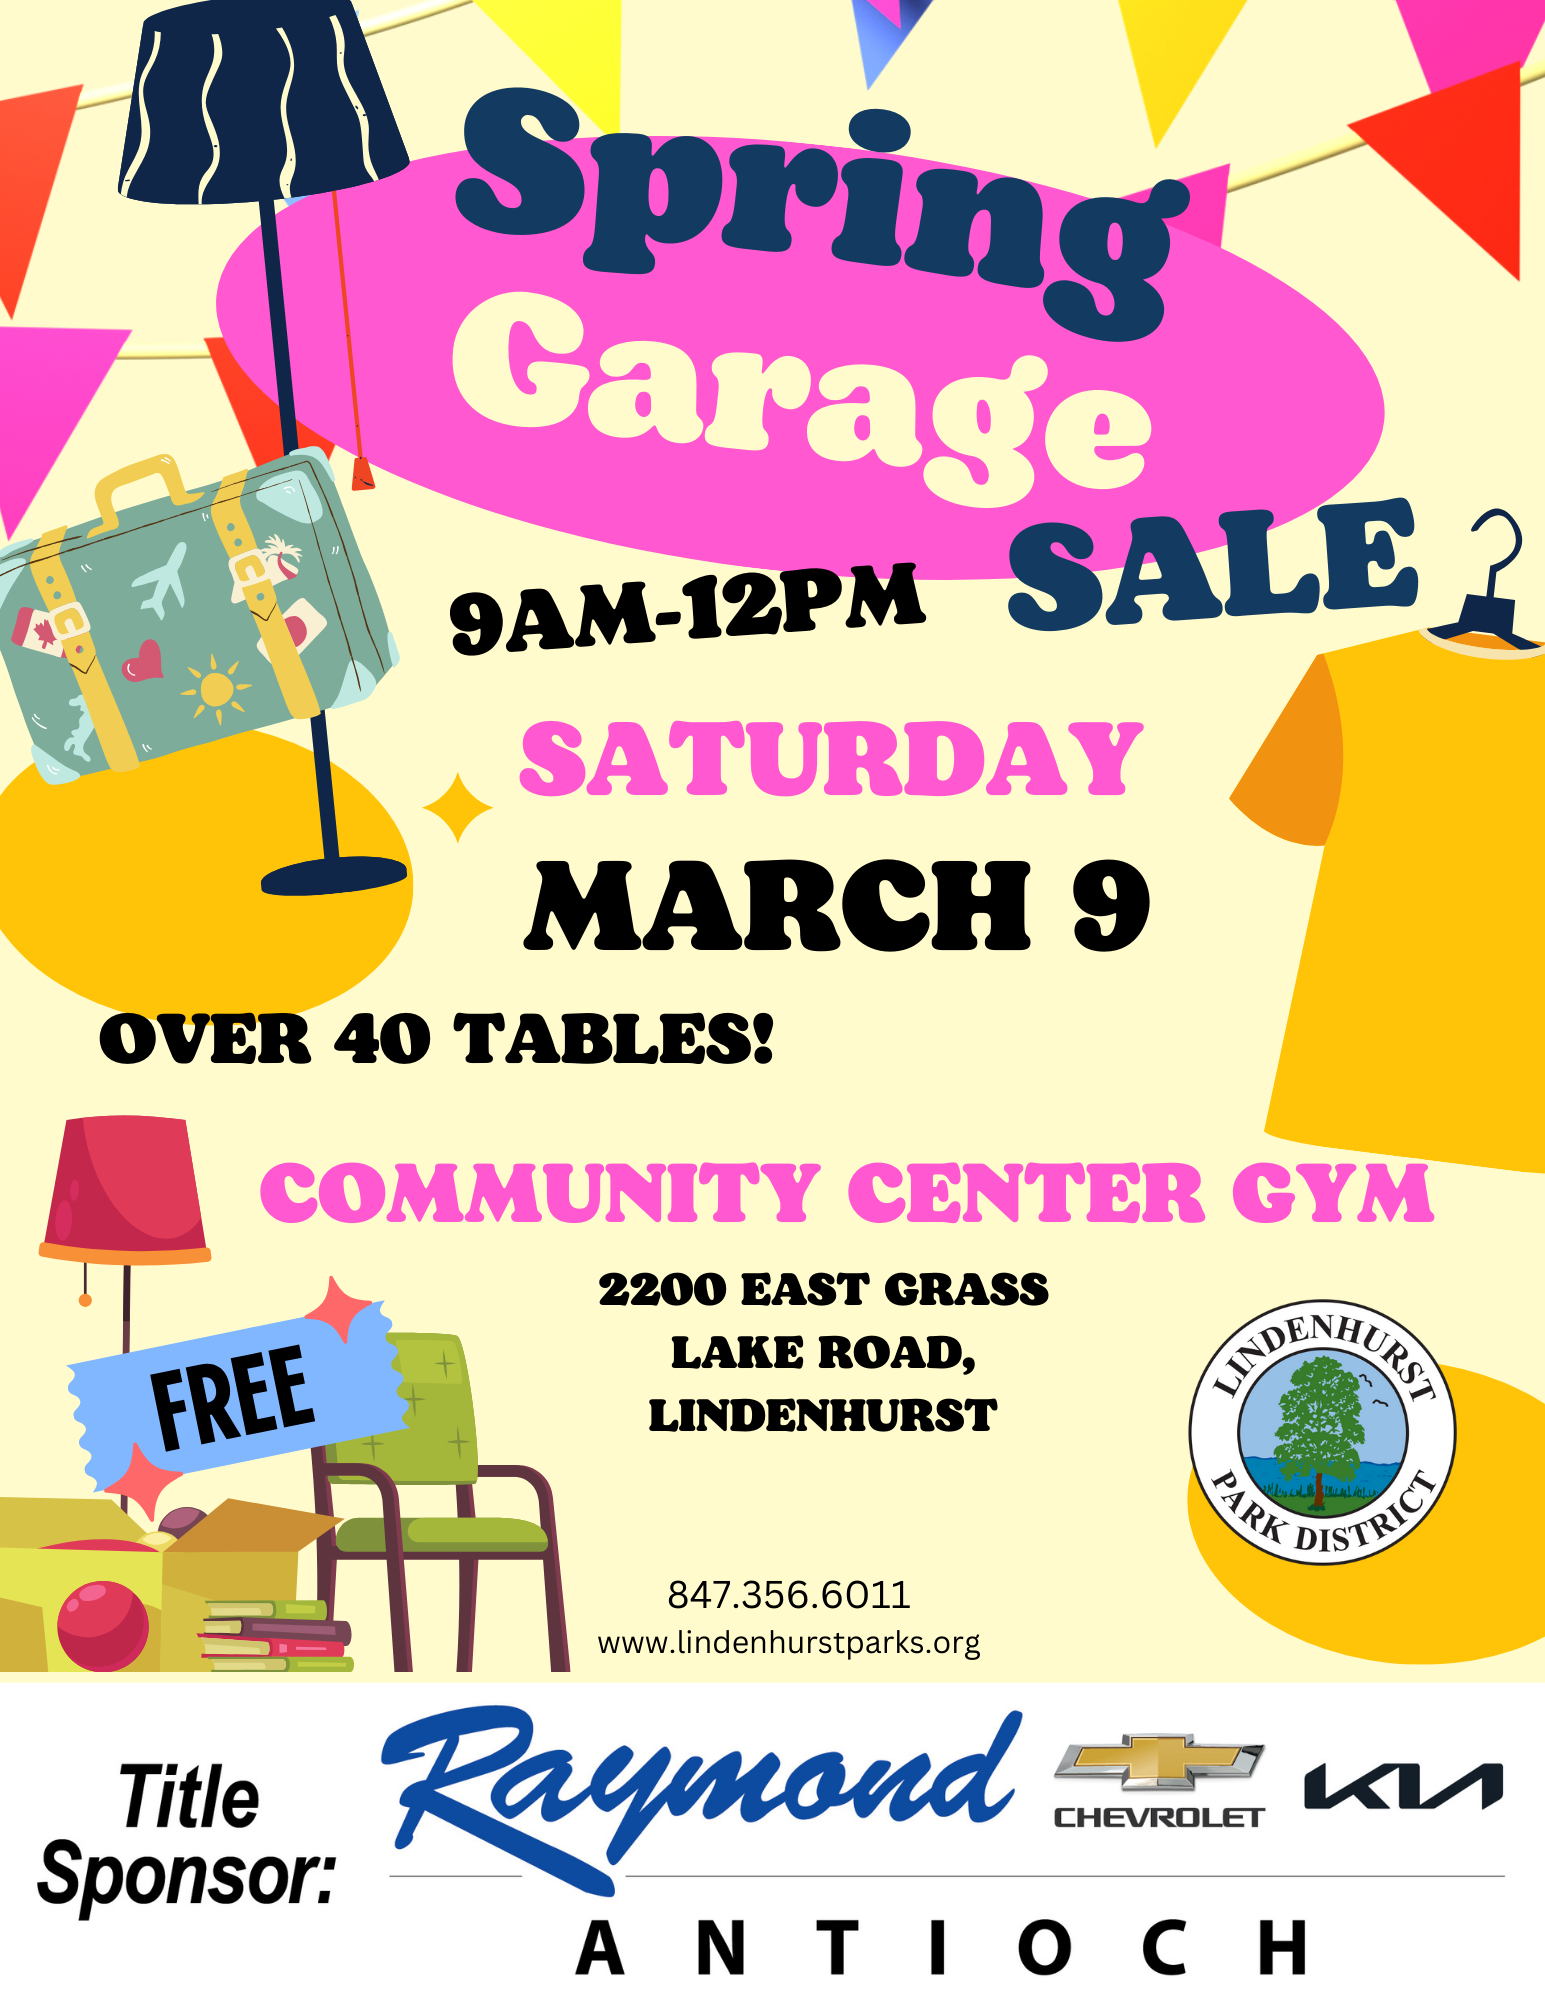 Brightly colored flyer announcing a "Spring Garage Sale" on Saturday, March 9, from 9 AM to 12 PM at the Community Center Gym, 2200 East Grass Lake Road, Lindenhurst, with over 40 tables. Admission is free, and the event is sponsored by Raymond Chevrolet Kia. Contact details for the Lindenhurst Park District are included.